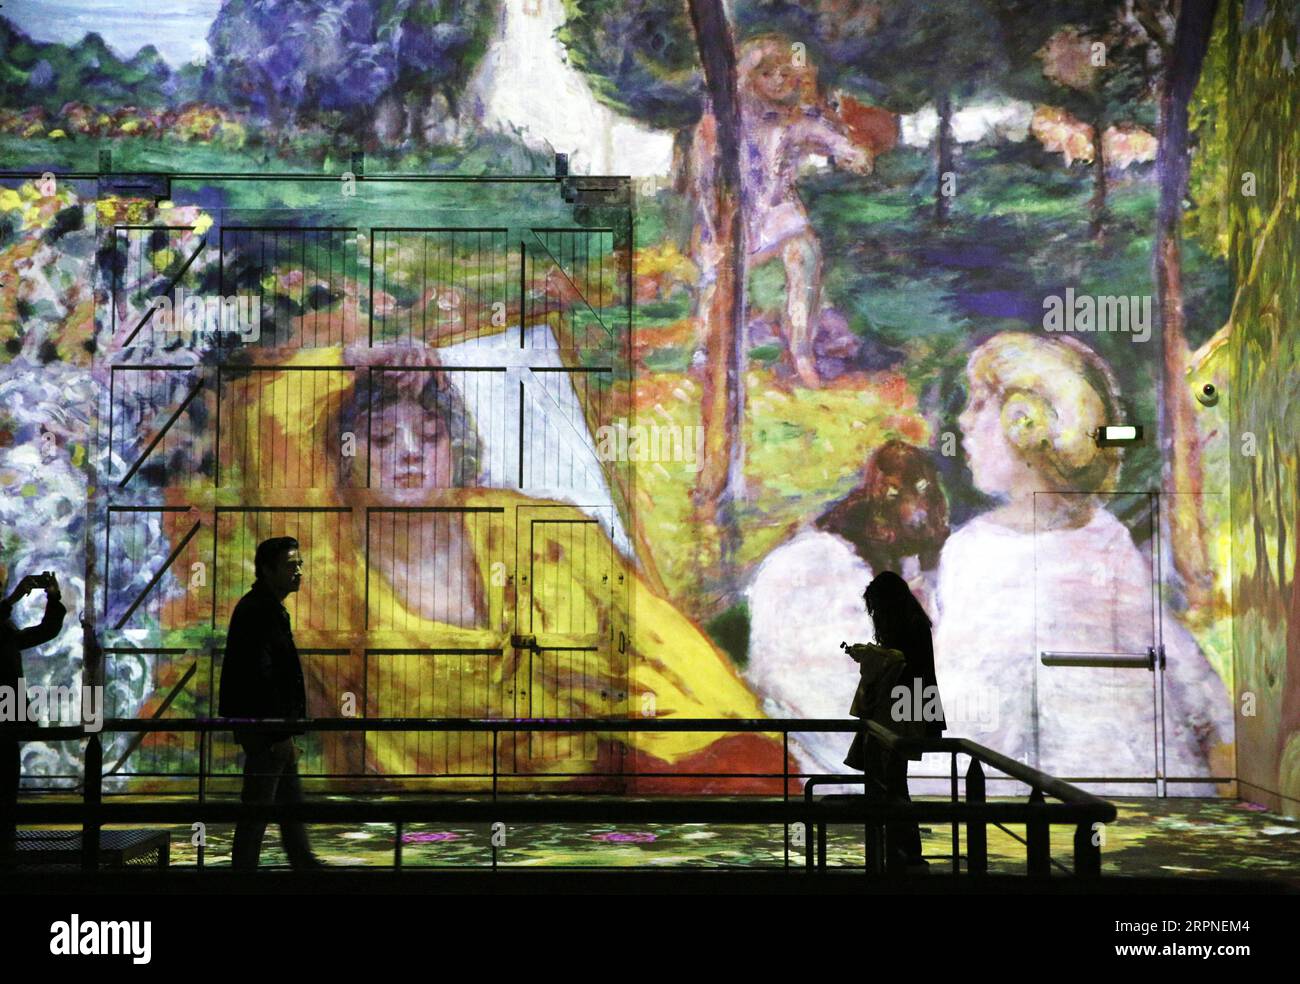 200227 -- PARIS, Feb. 27, 2020 -- People visit the digital exhibition titled Monet, Renoir...Chagall: Journeys around the Mediterranean during a press review in Paris, France, Feb. 27, 2020. The digital exhibition to be held from Feb. 28, 2020 to Jan. 3, 2021 presents visitors with an itinerary that spans the period between Impressionism and modernism. The exhibition immerses visitors in the masterpieces of 20 artists, including Renoir, Monet, Matisse, Chagall, etc., and highlights the link between artistic creativity and the Mediterranean shores.  FRANCE-PARIS-DIGITAL EXHIBITION GaoxJing PUBL Stock Photo